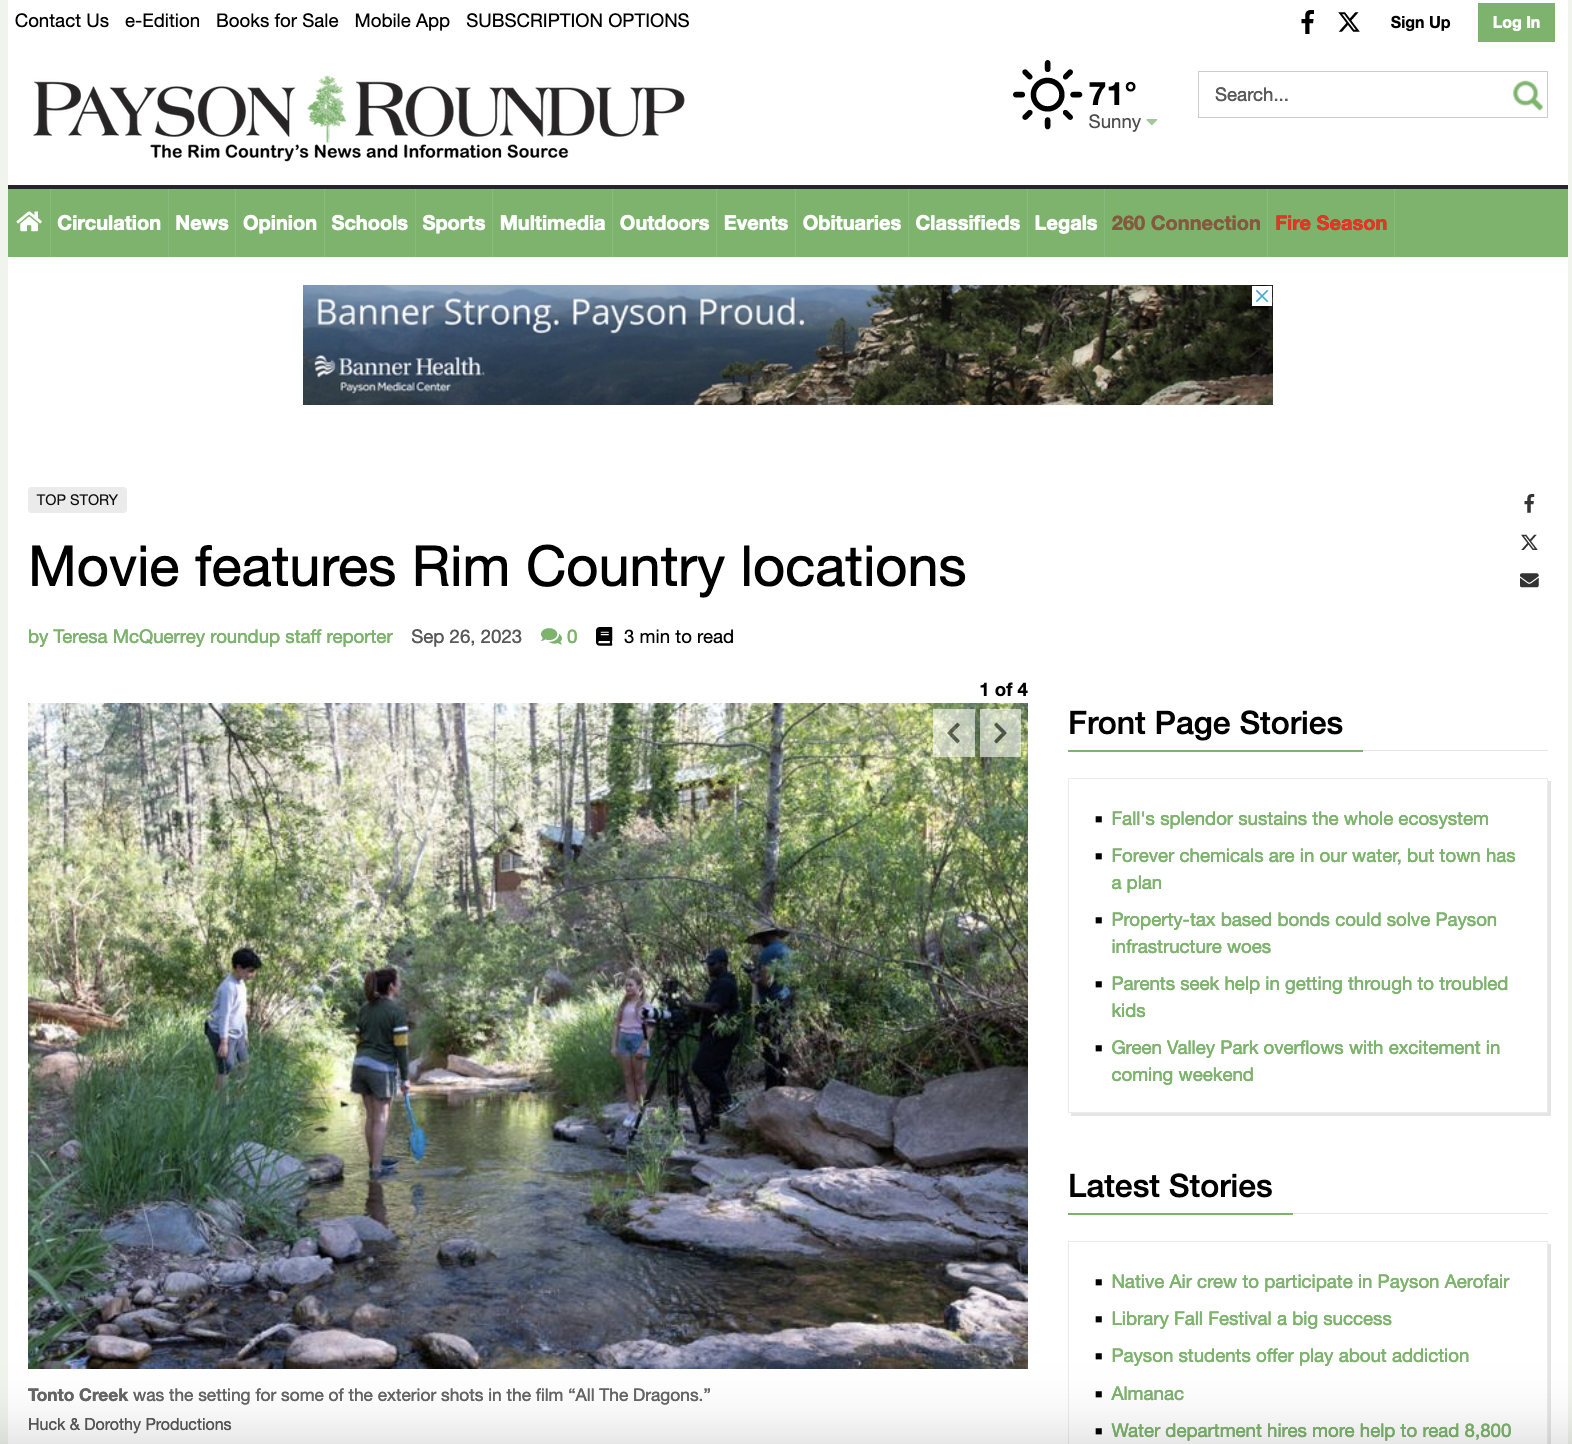 New Article in Payson Roundup